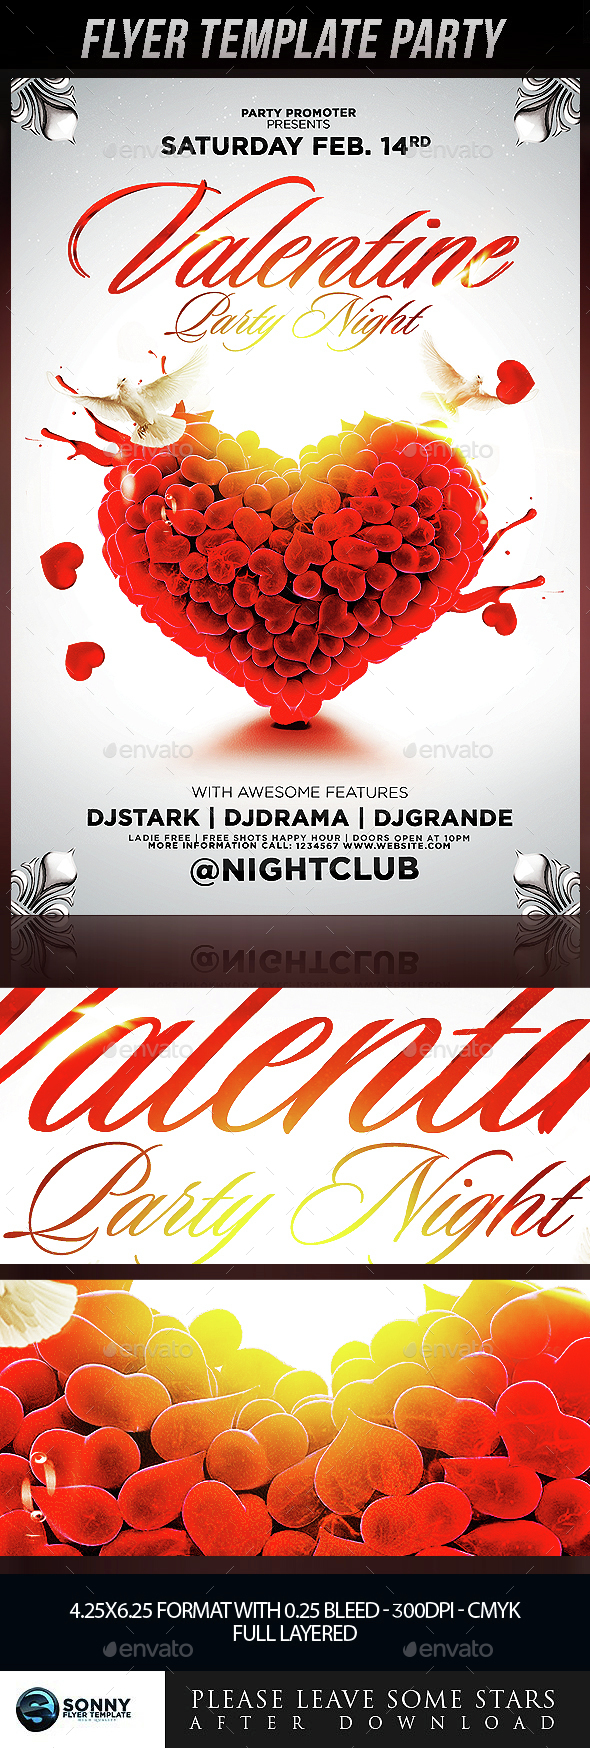 01 Valentines-Party-Night-Flyer-Preview